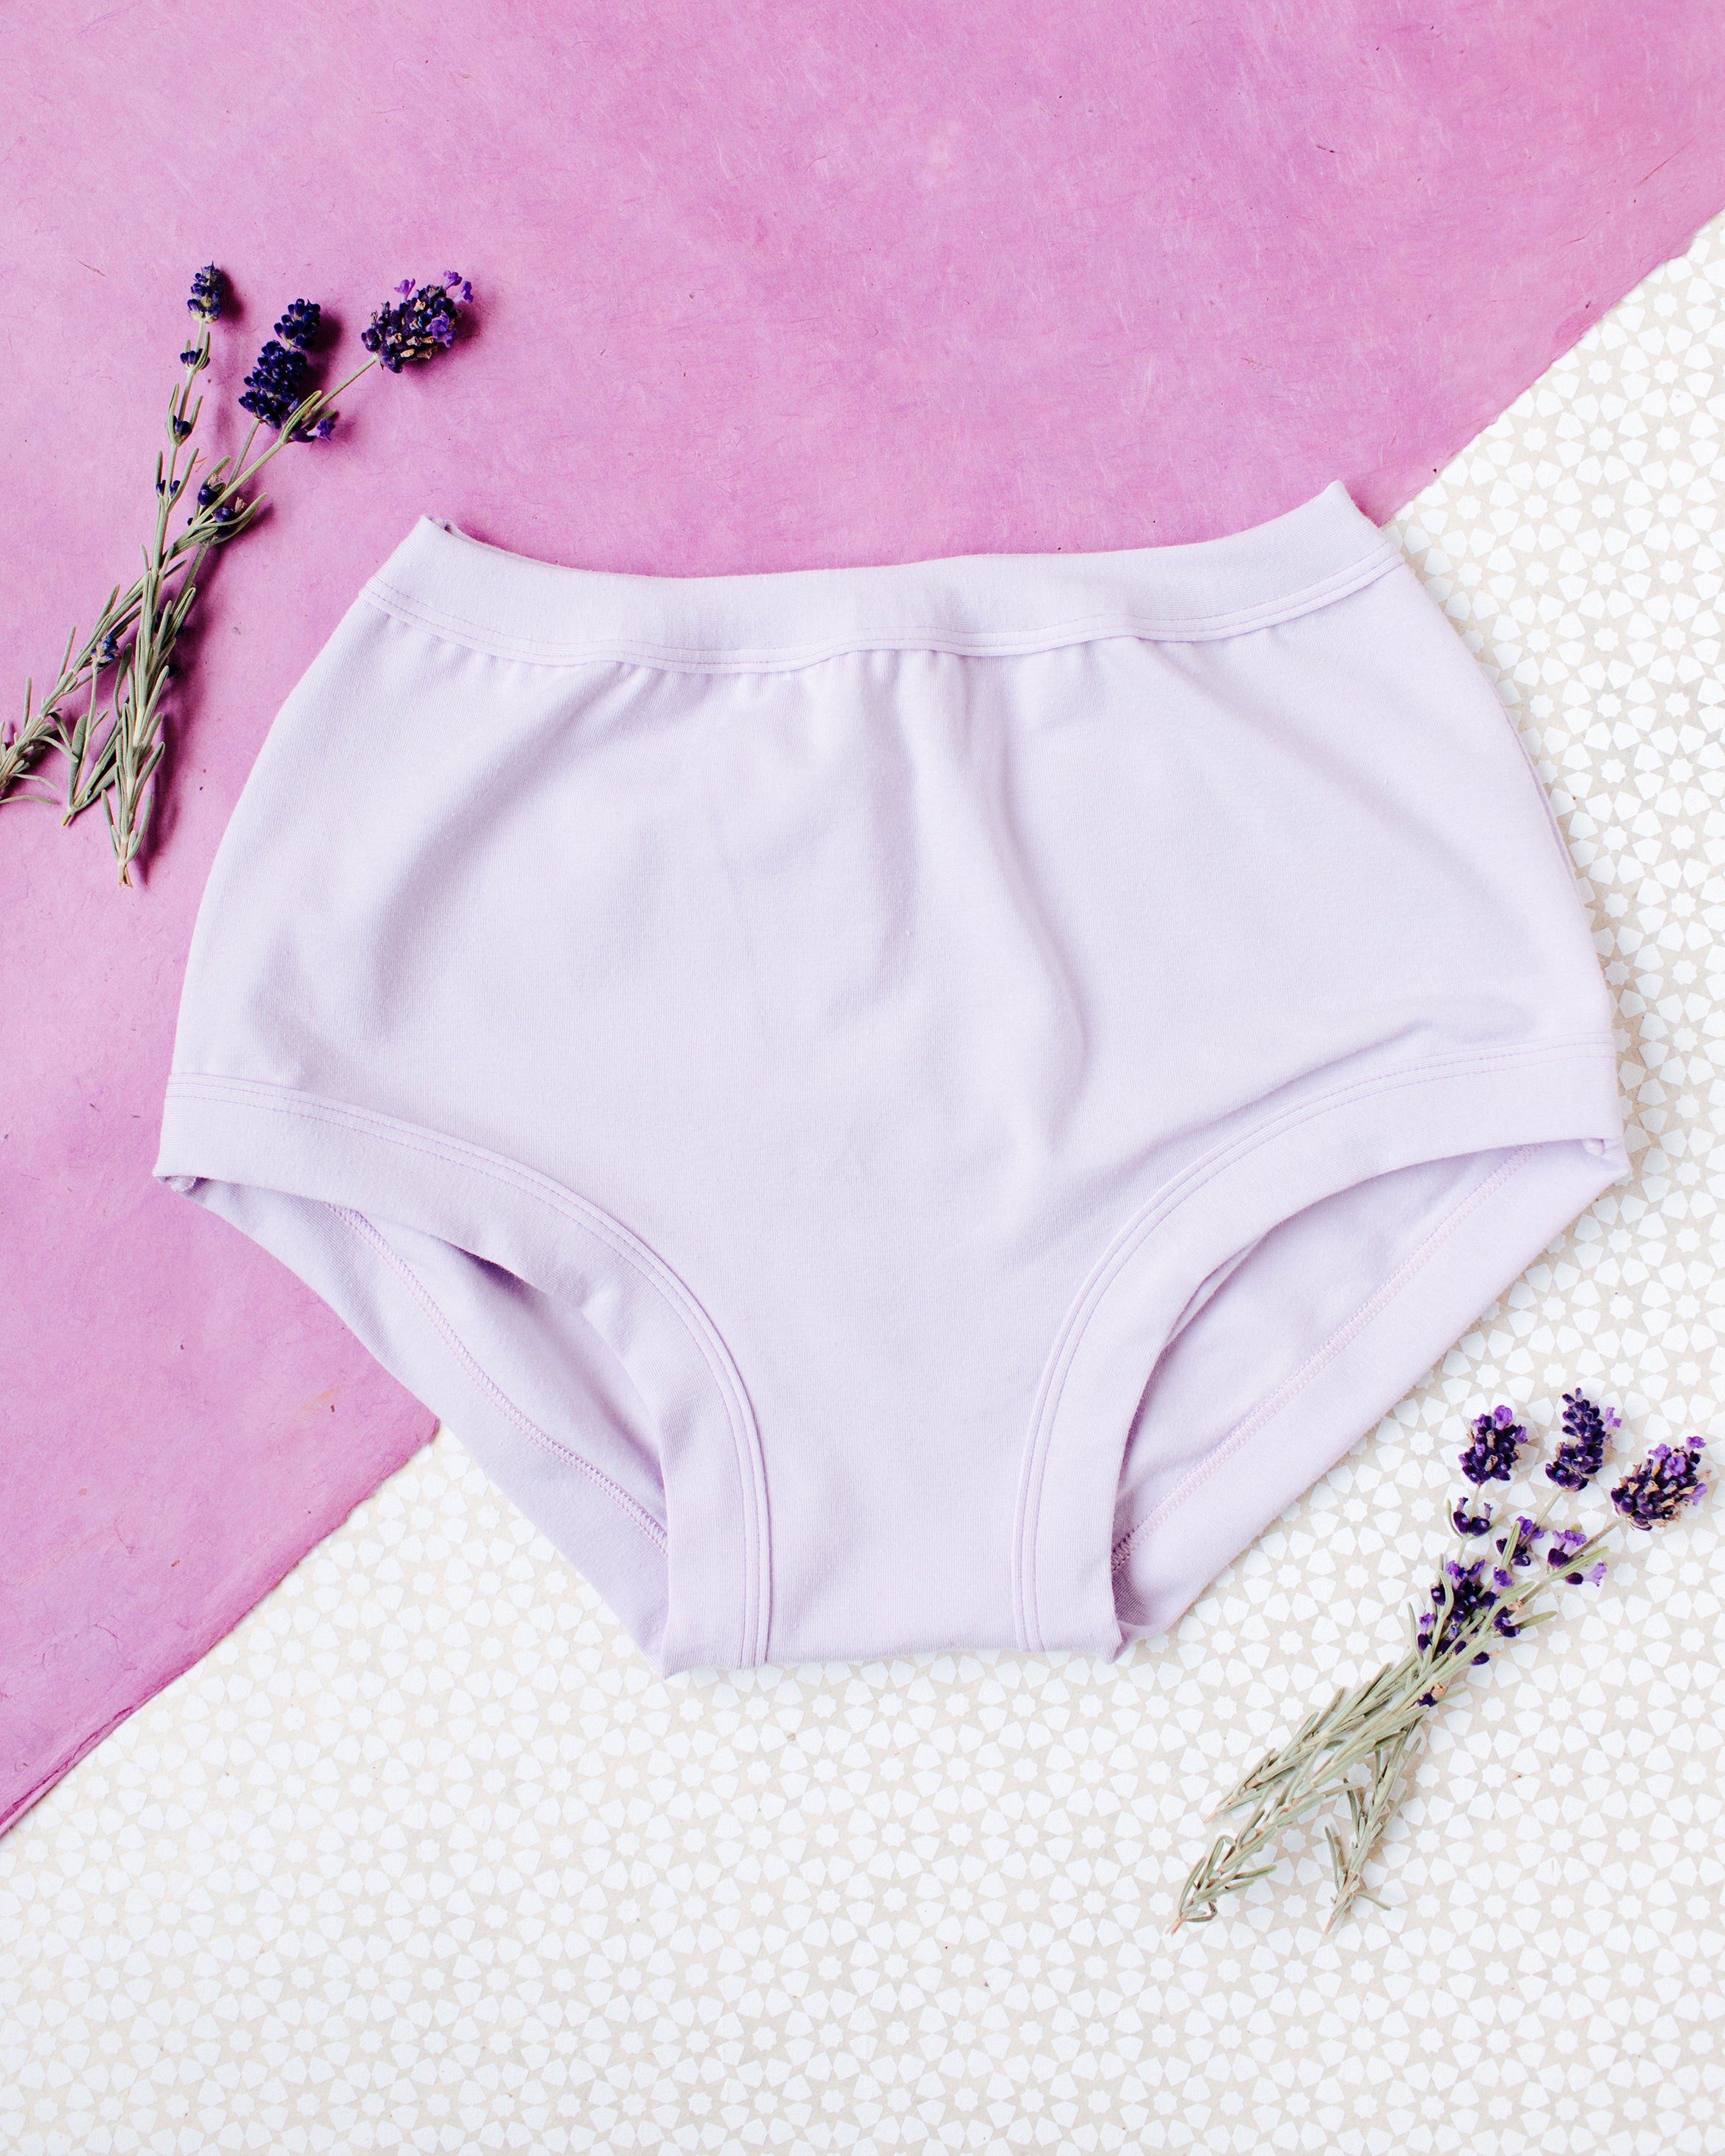 Flat lay of Light Lavender in Original style underwear on a purple and white patterned surface with lavender sprigs.